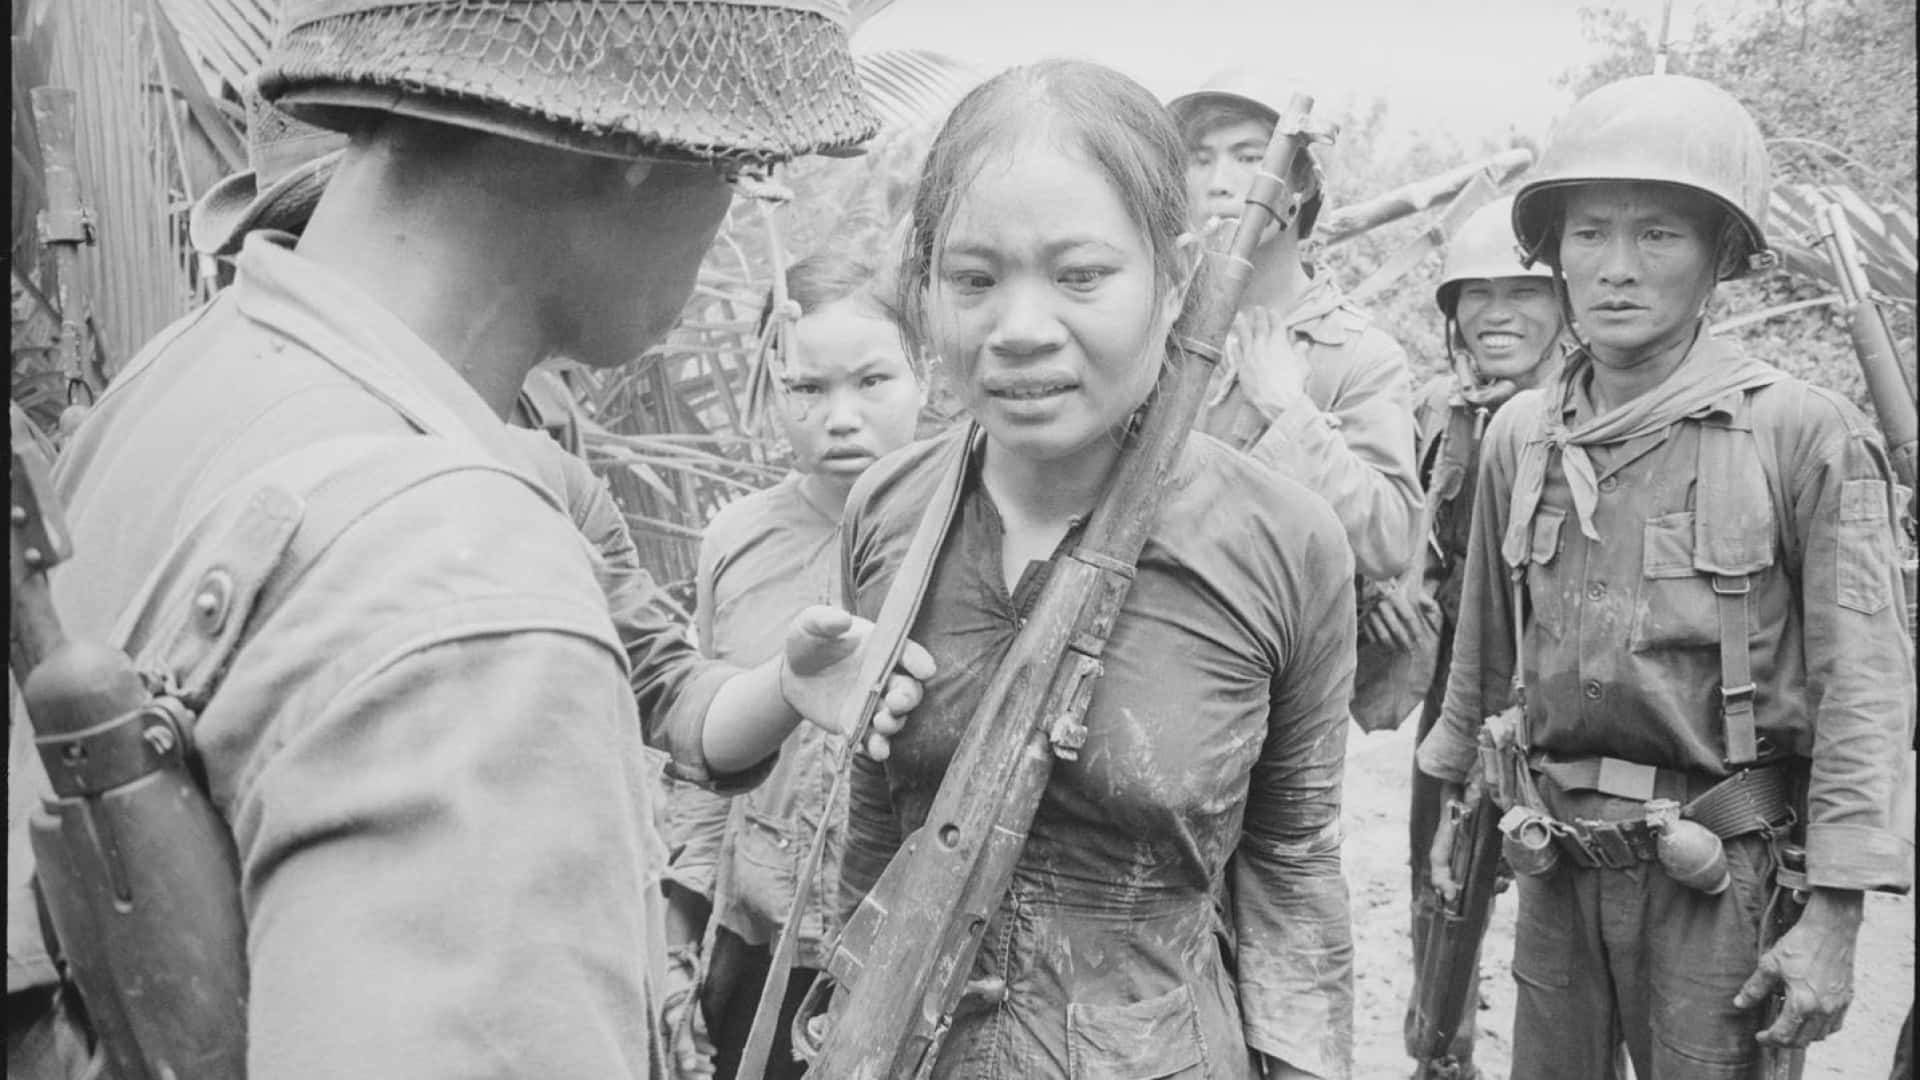 A Woman Is Talking To Soldiers In A Black And White Photo